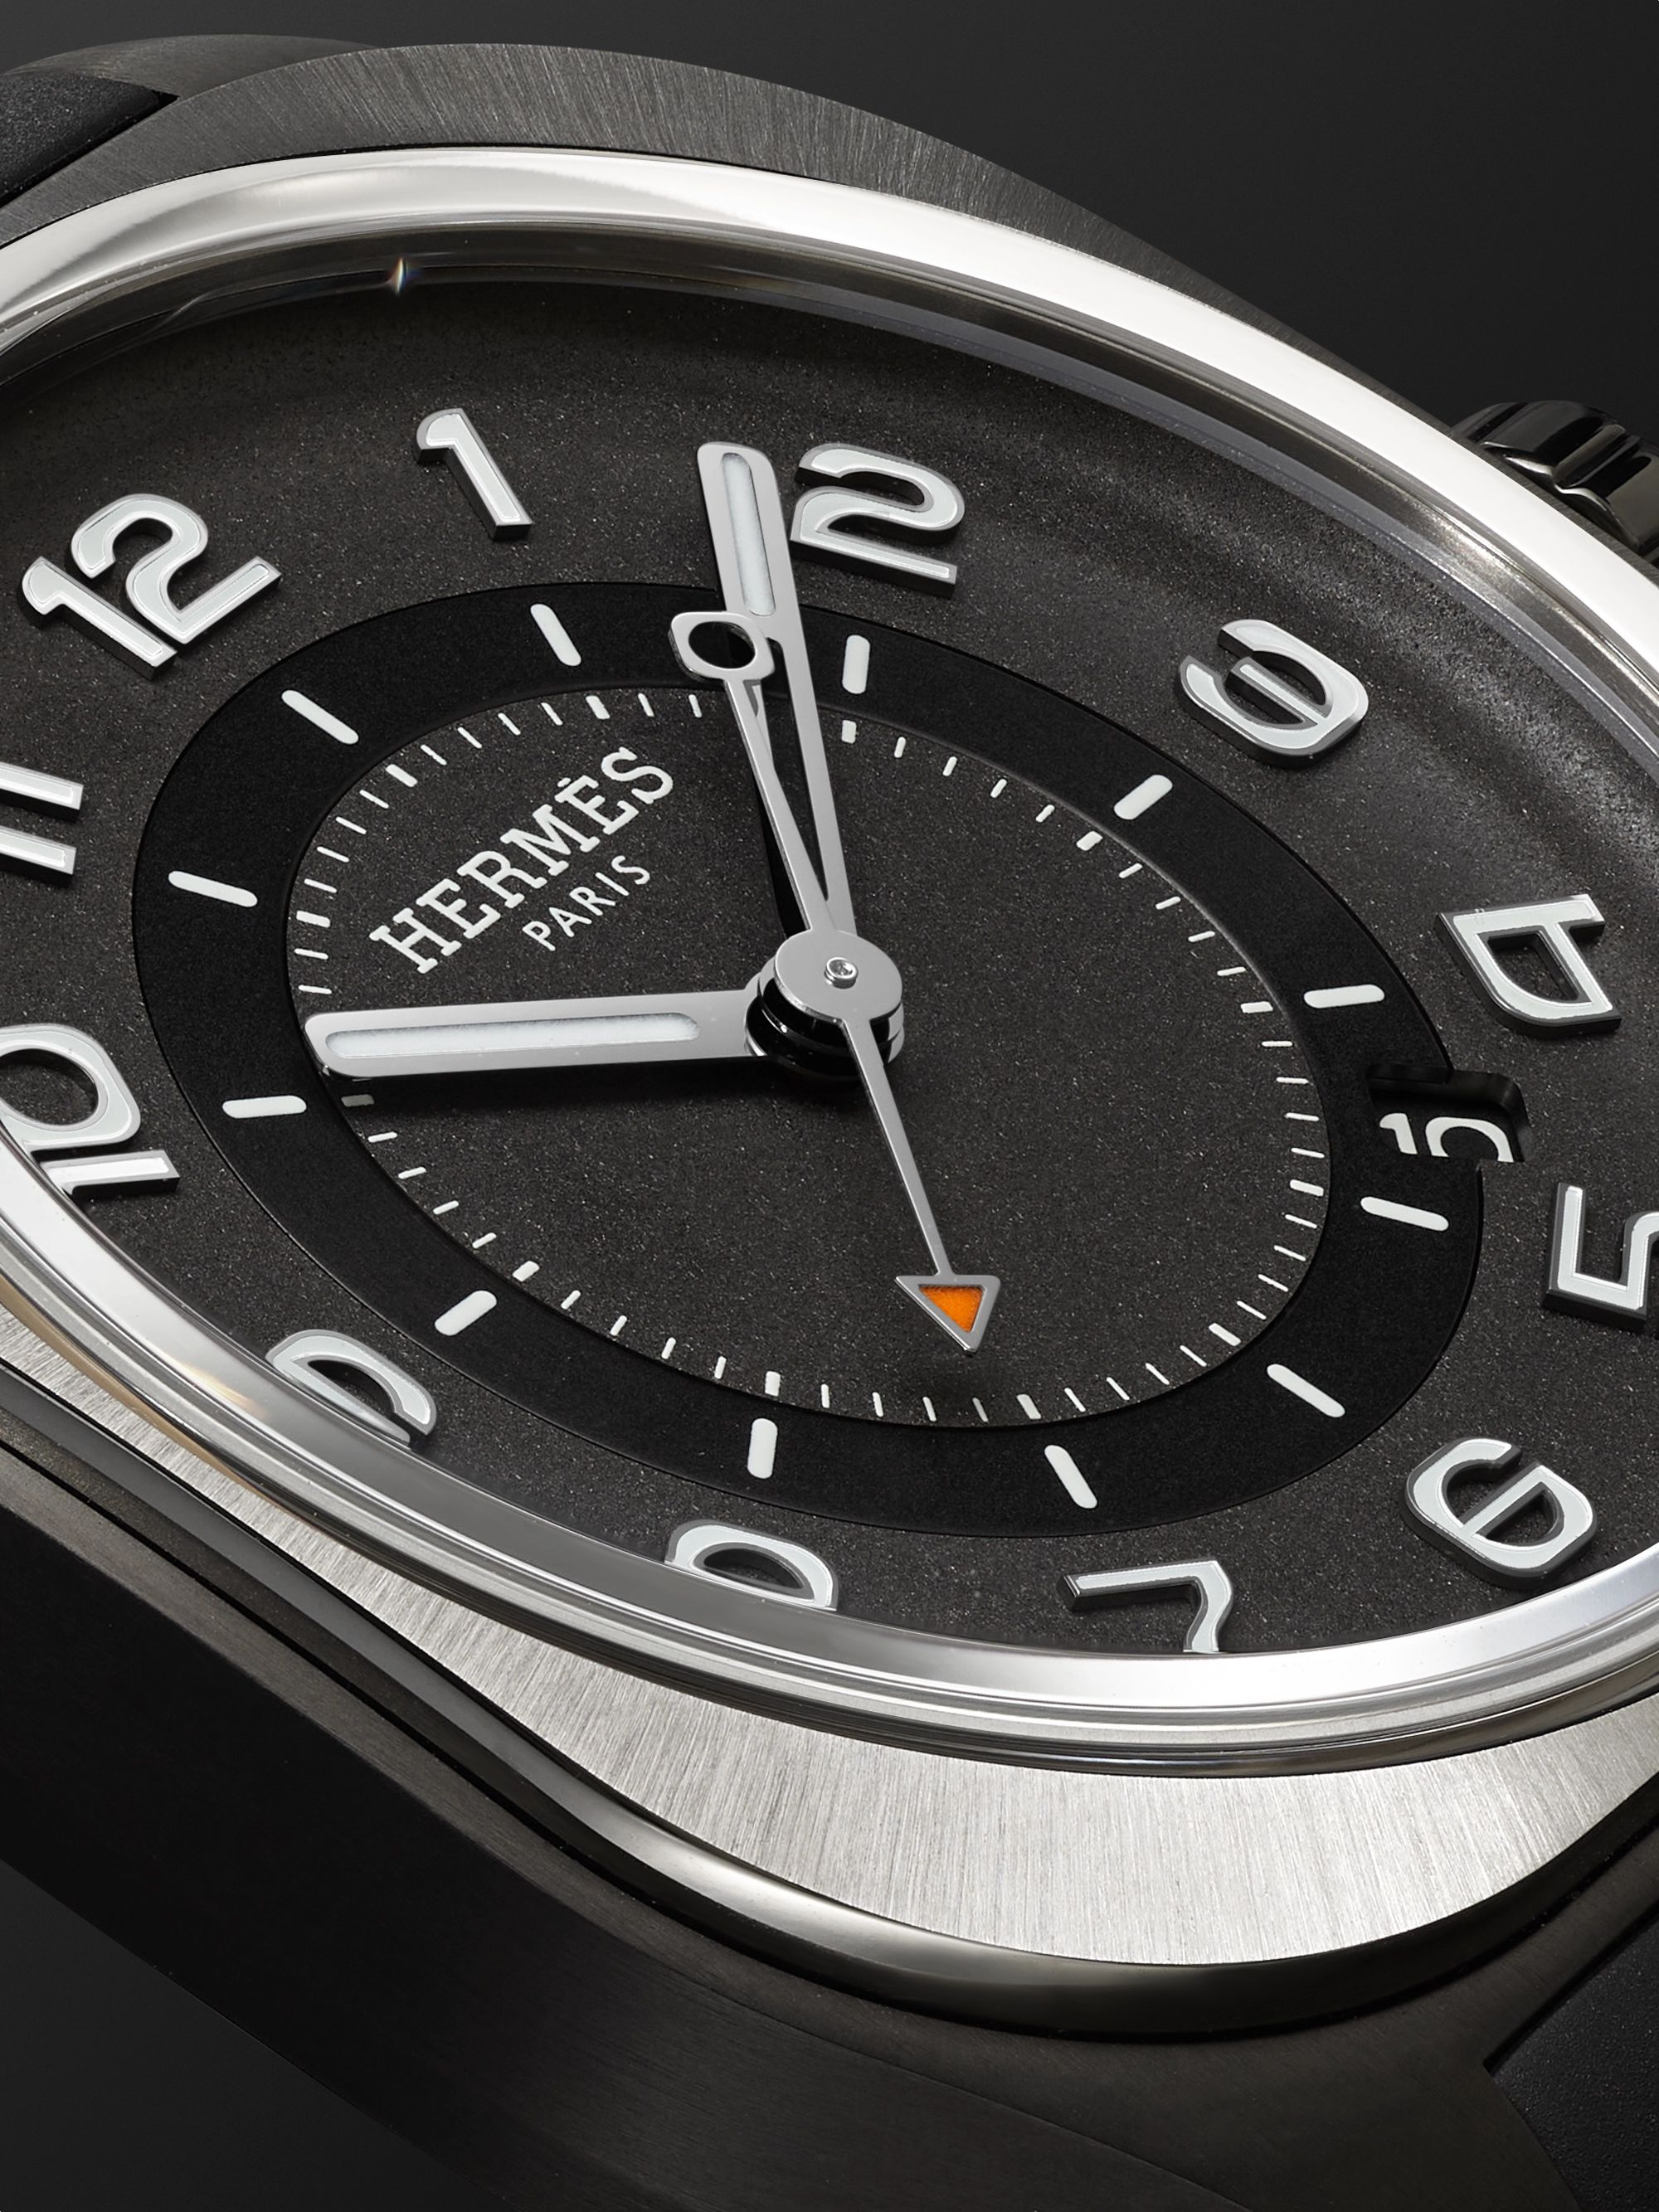 HERMÈS TIMEPIECES H08 Automatic 39mm DLC-Coated Titanium and Rubber Watch, Ref. No. 049428WW00